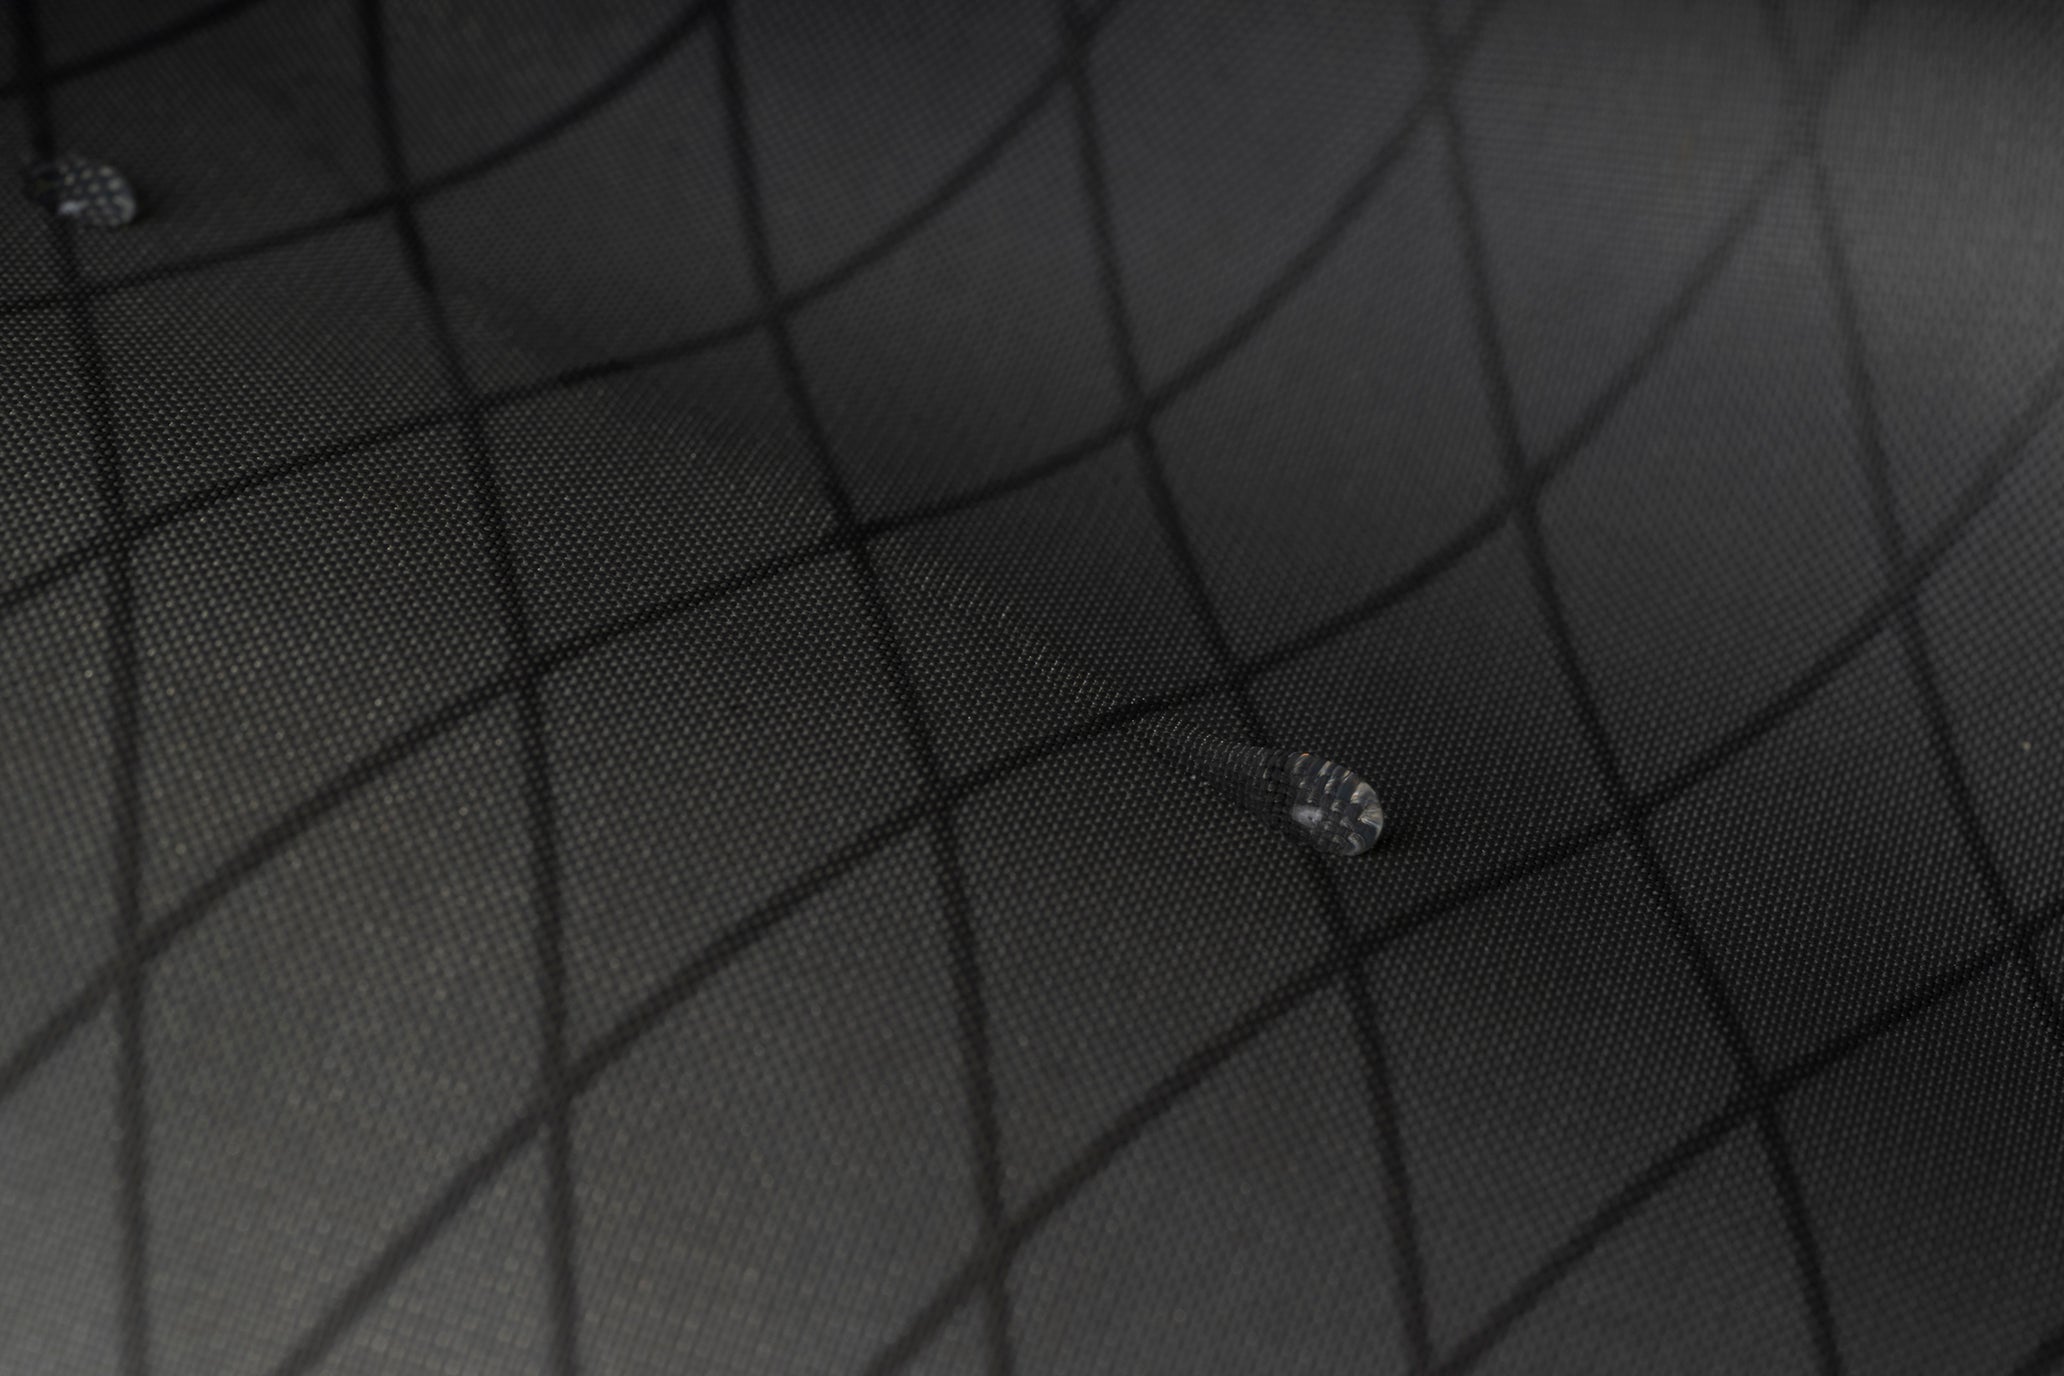 X-Pac fabric with droplets of water